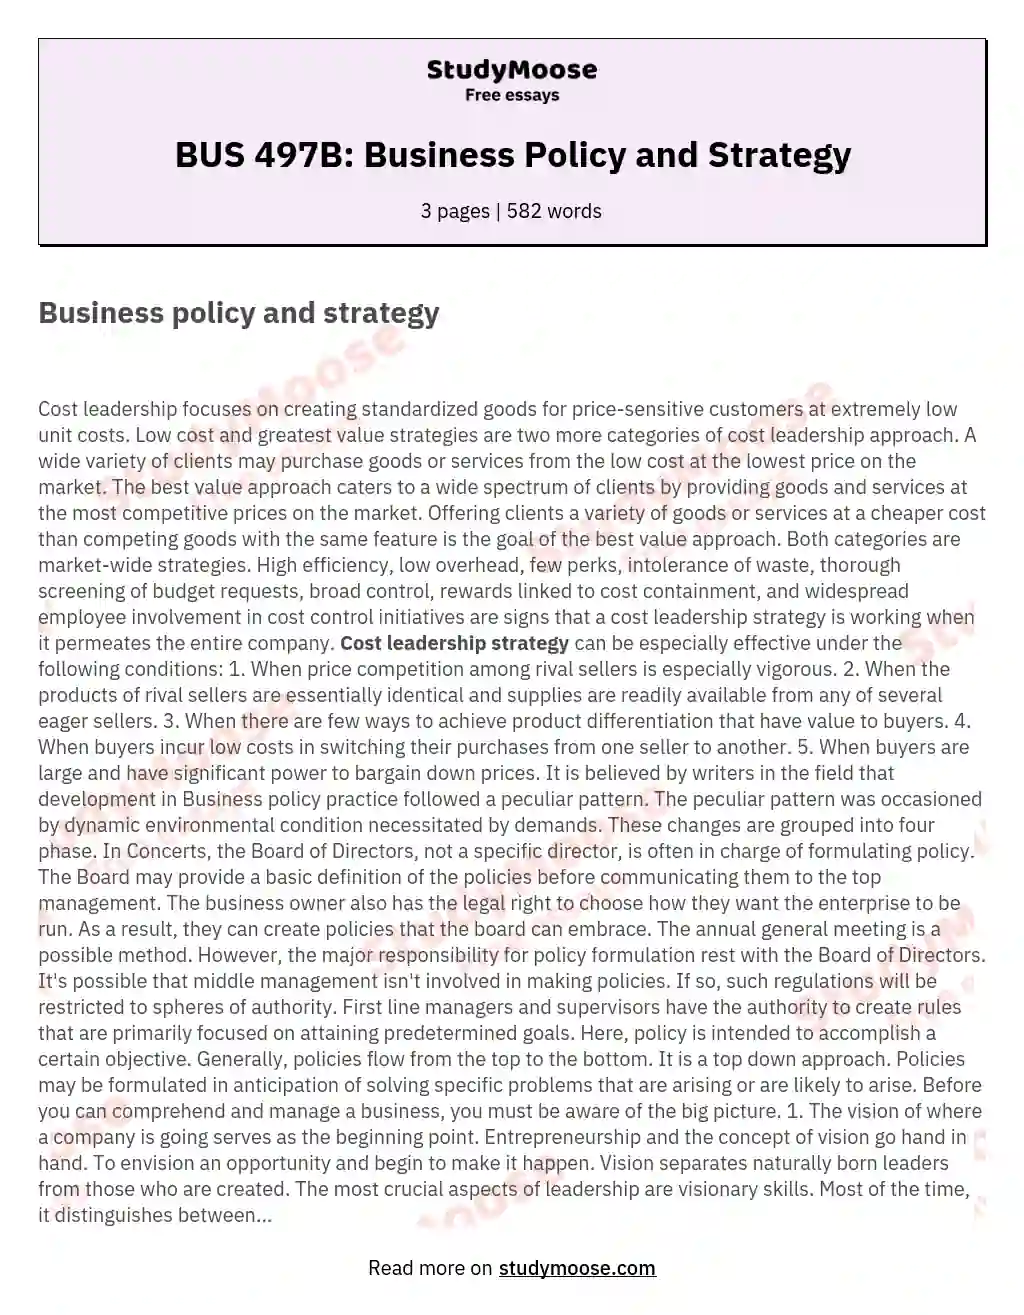 BUS 497B: Business Policy and Strategy essay